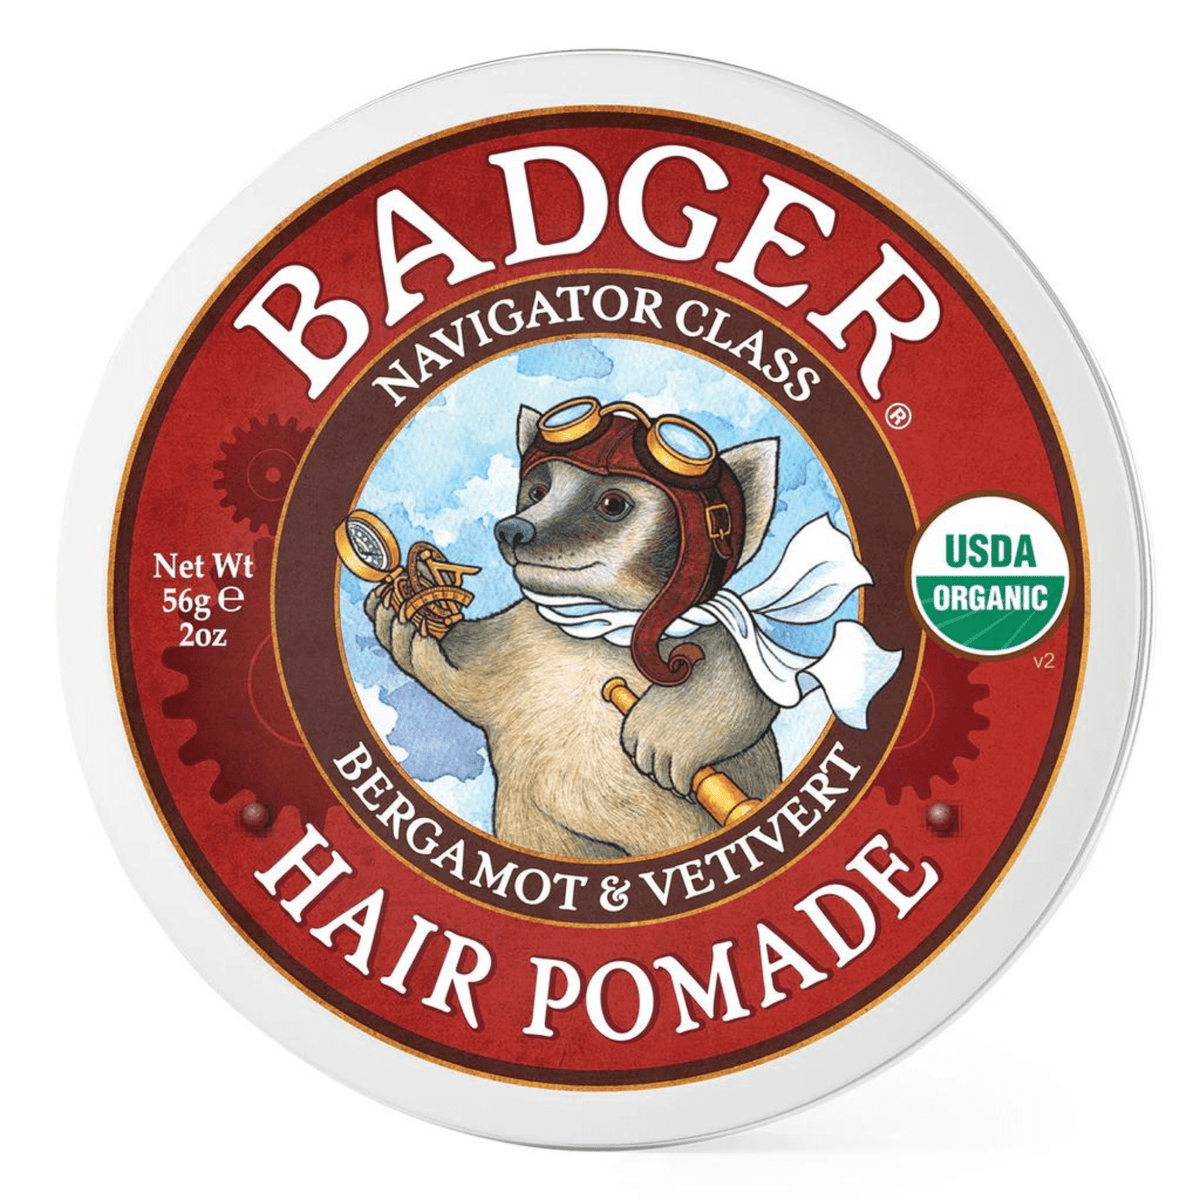 Primary Image of Hair Pomade